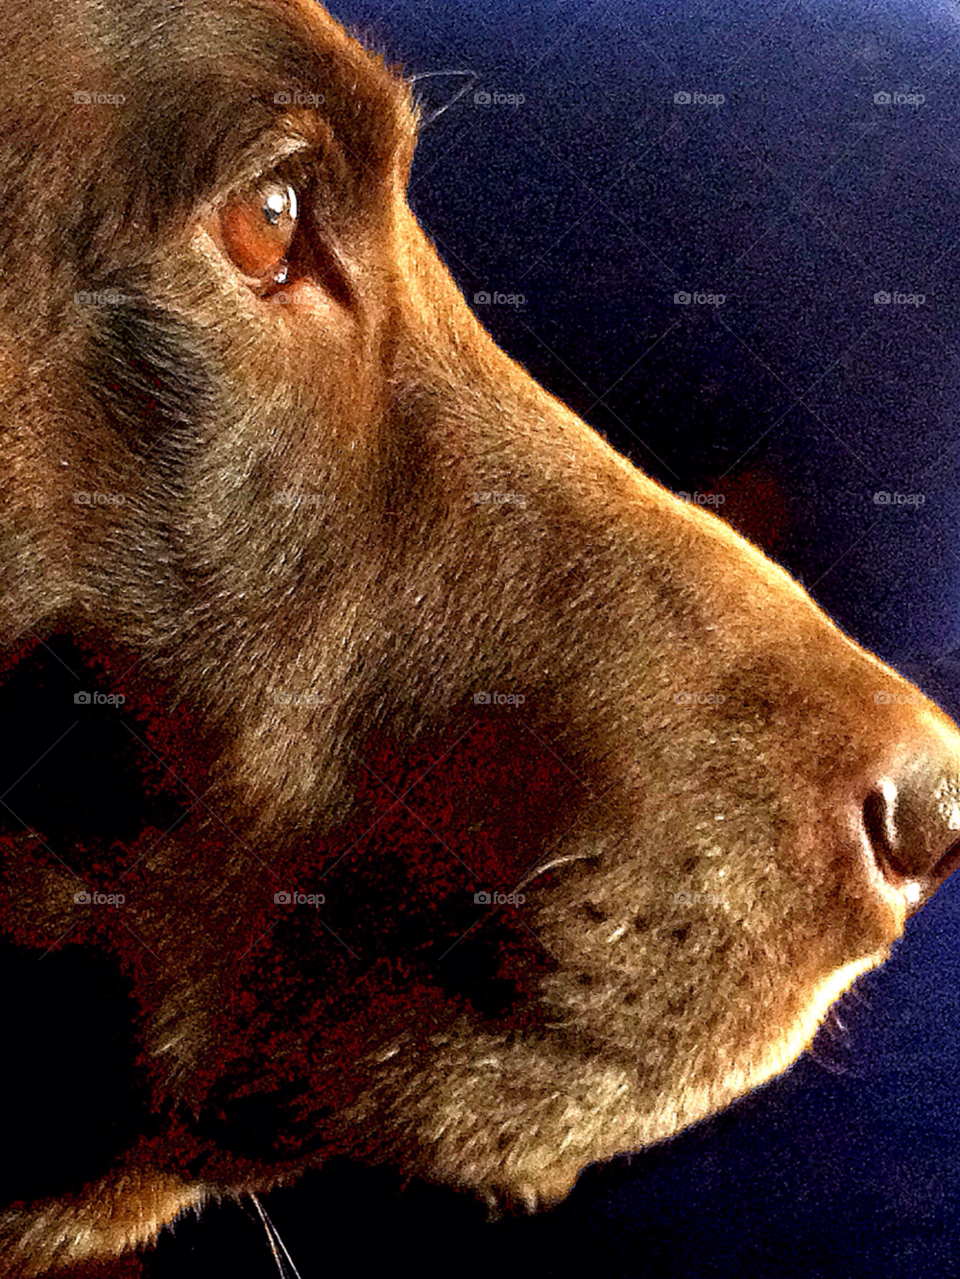 north london missy the chocolate labrador in pensive mode. listening to music copyright mcvirn etienne by mackyboy